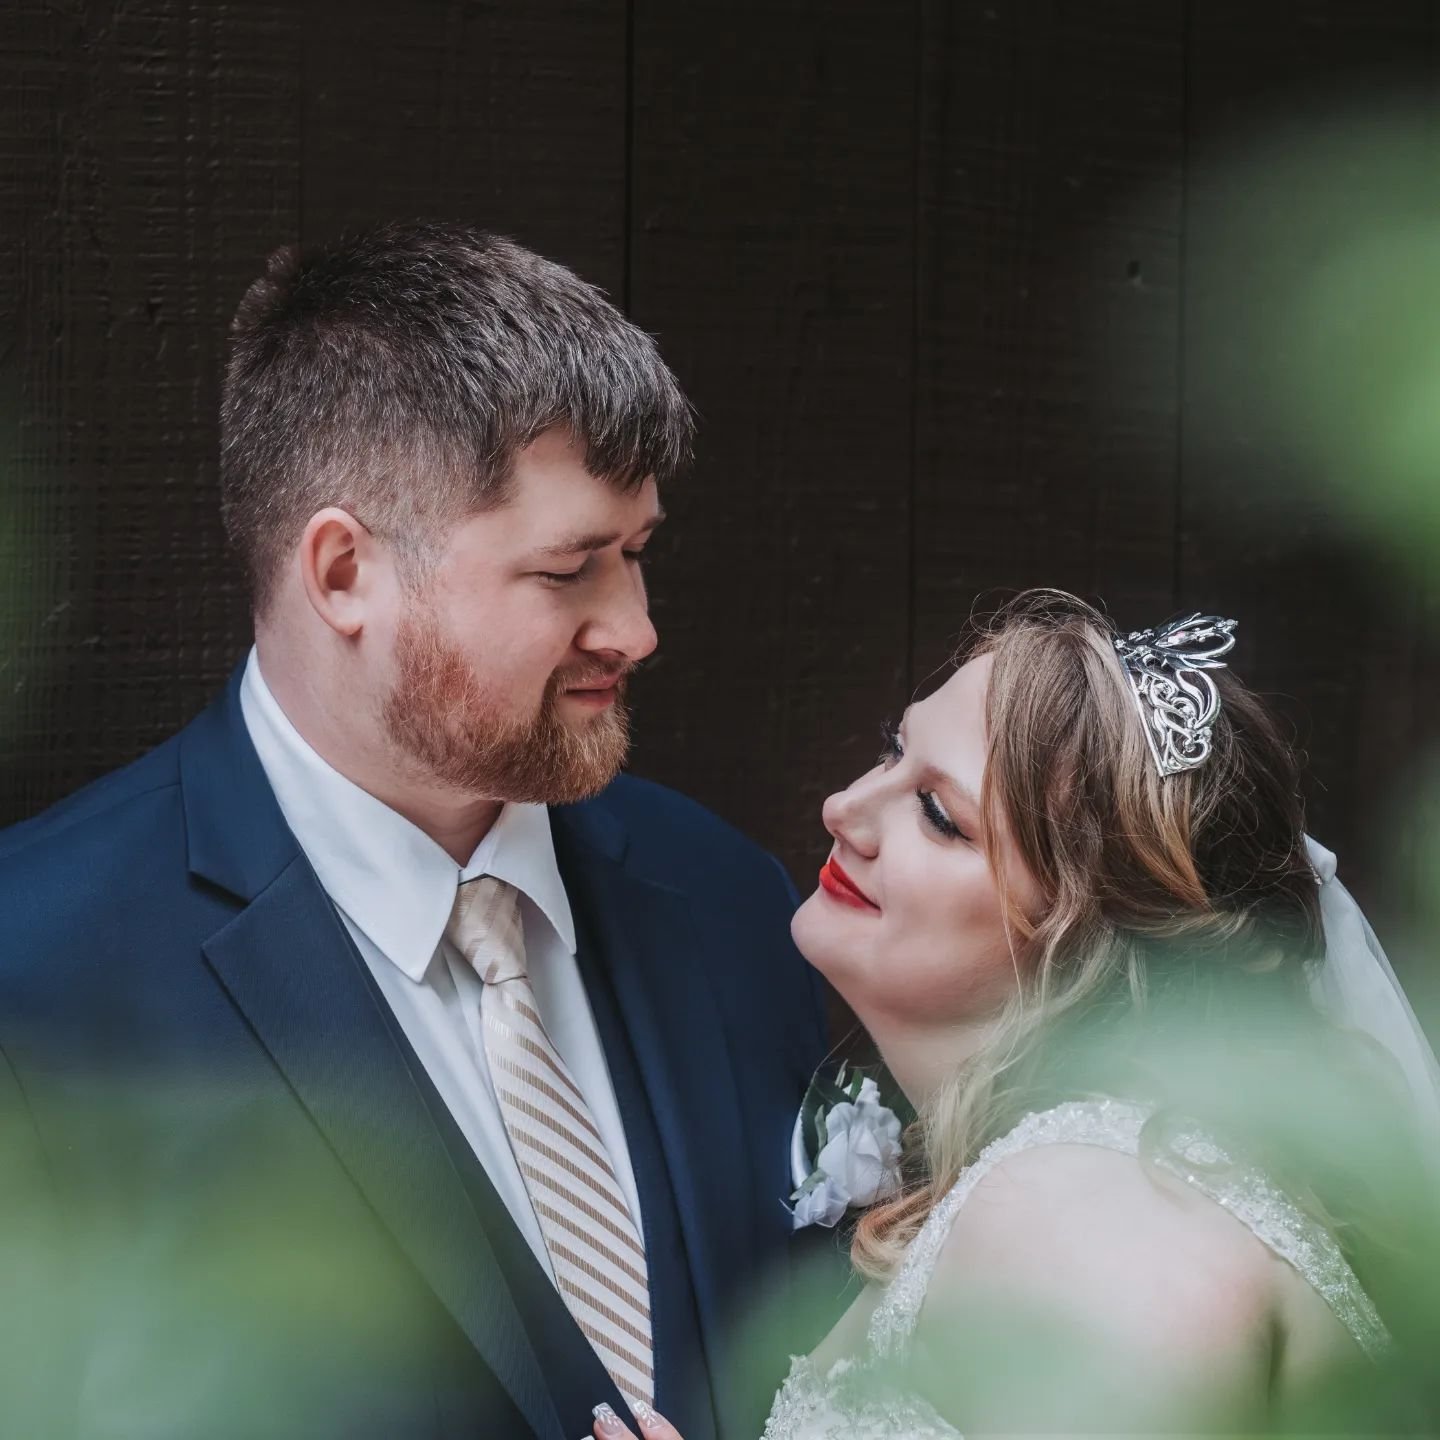 I had the pleasure of capturing Caitlin and Daniel's beautiful wedding day yesterday! Despite some weather, it was an incredible day. Can't wait to share more!